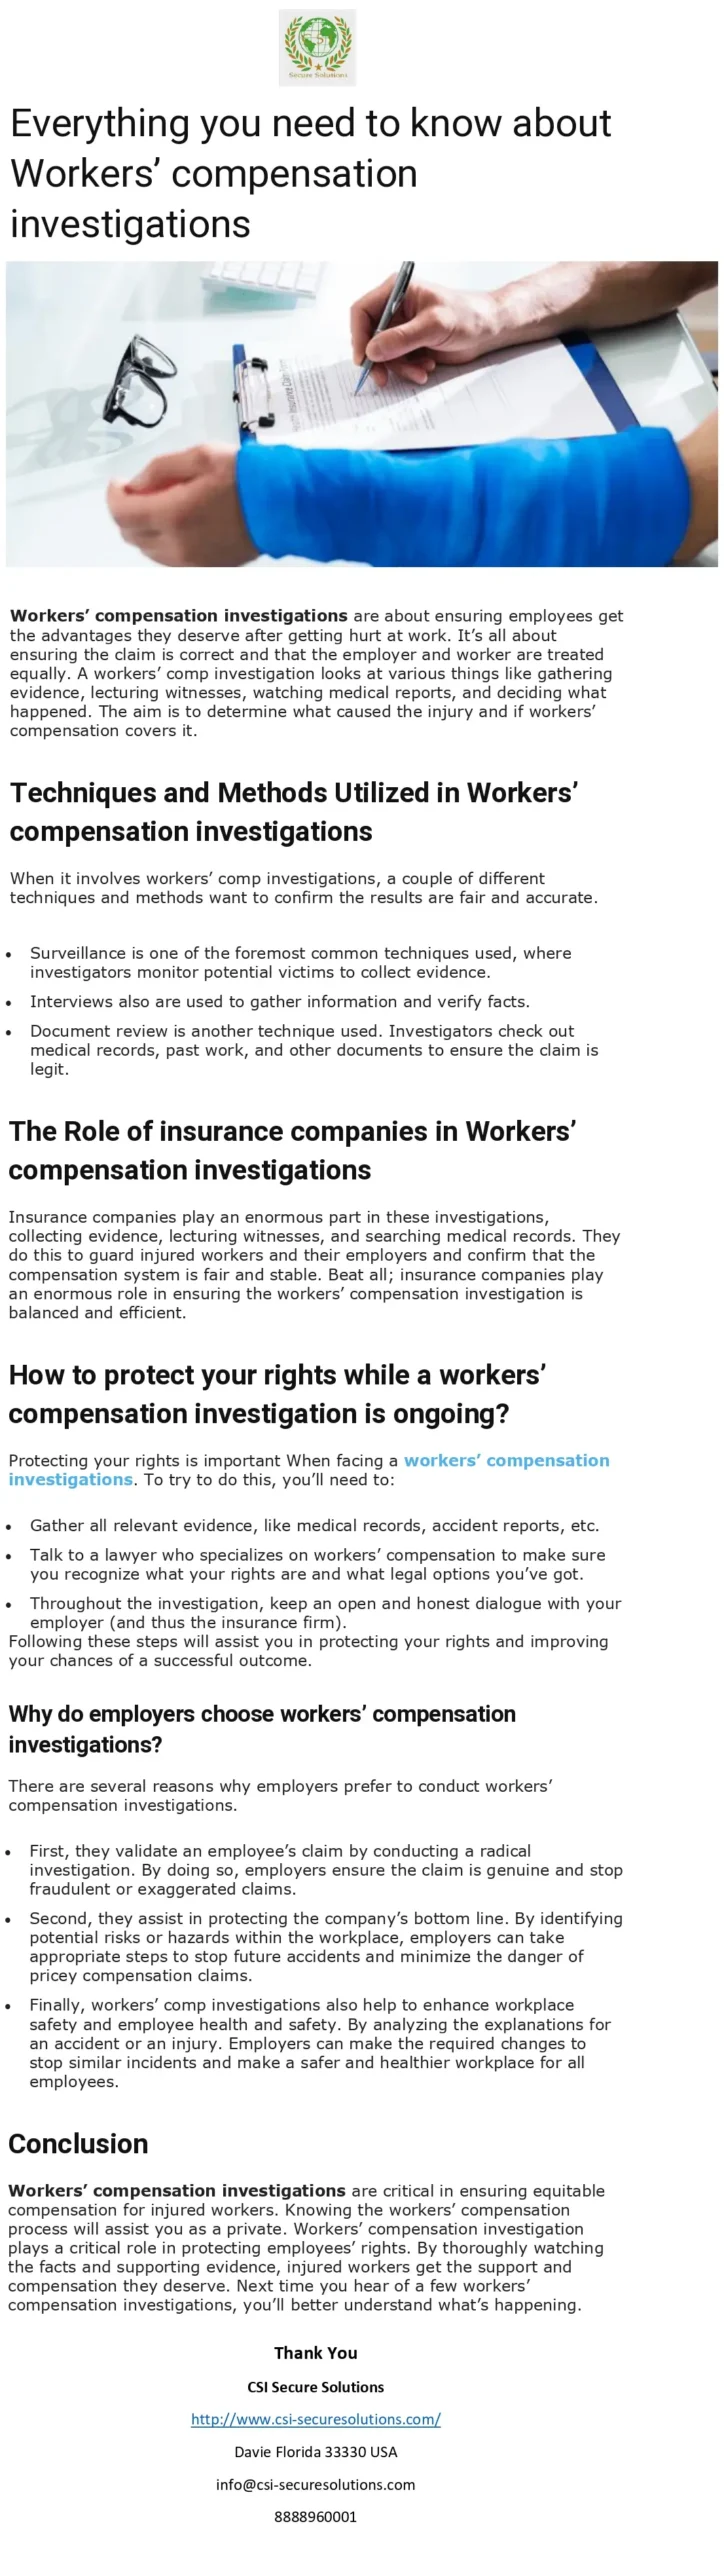 Workers Comp Investigations